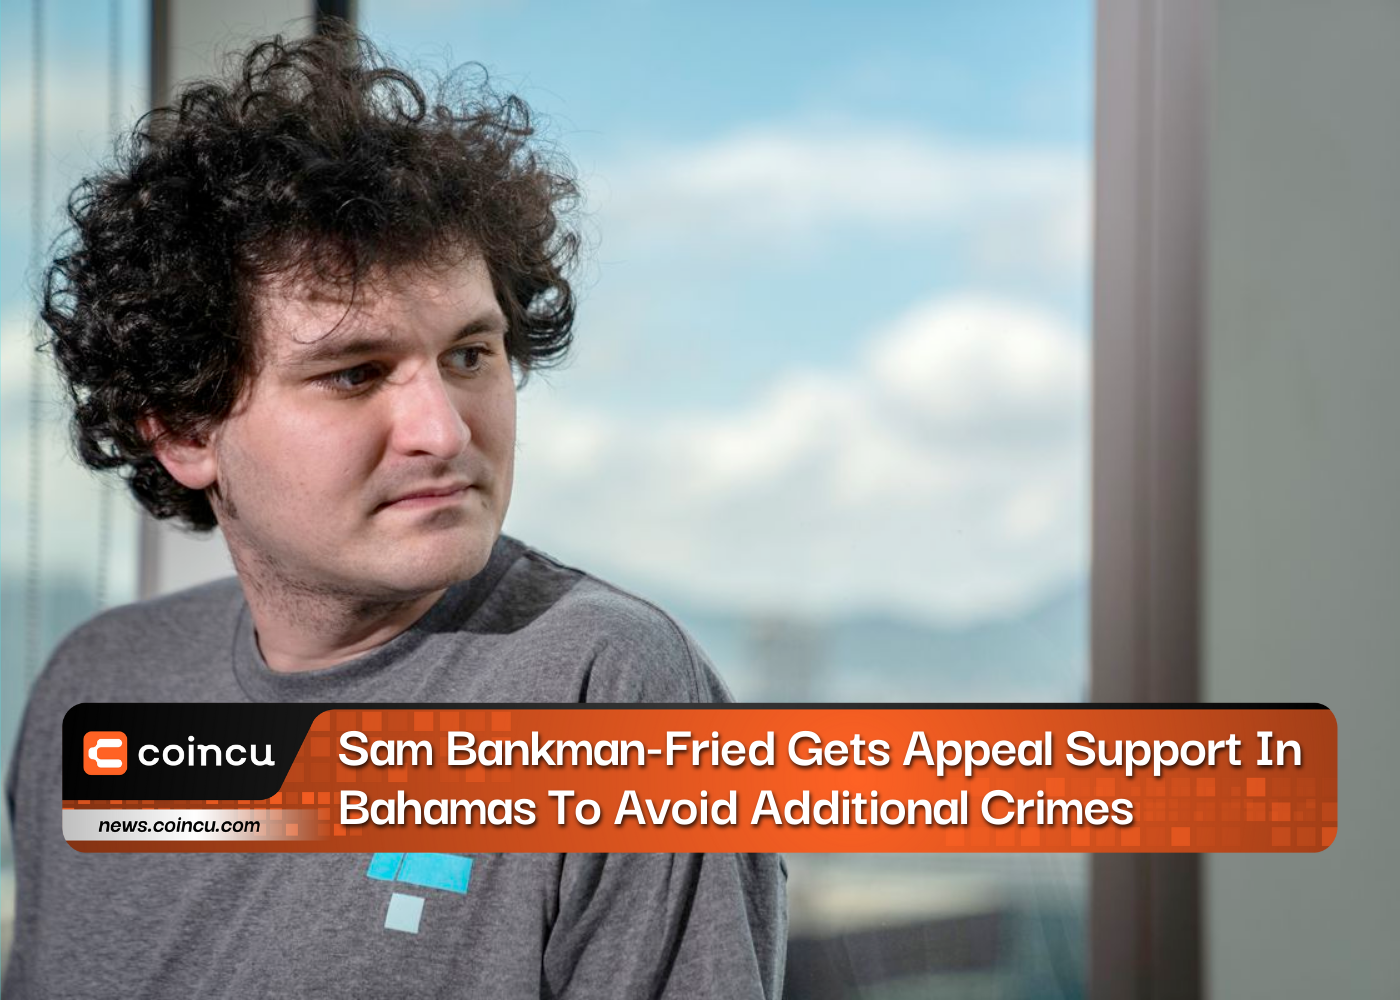 Sam Bankman-Fried Gets Appeal Support In Bahamas To Avoid Additional Crimes